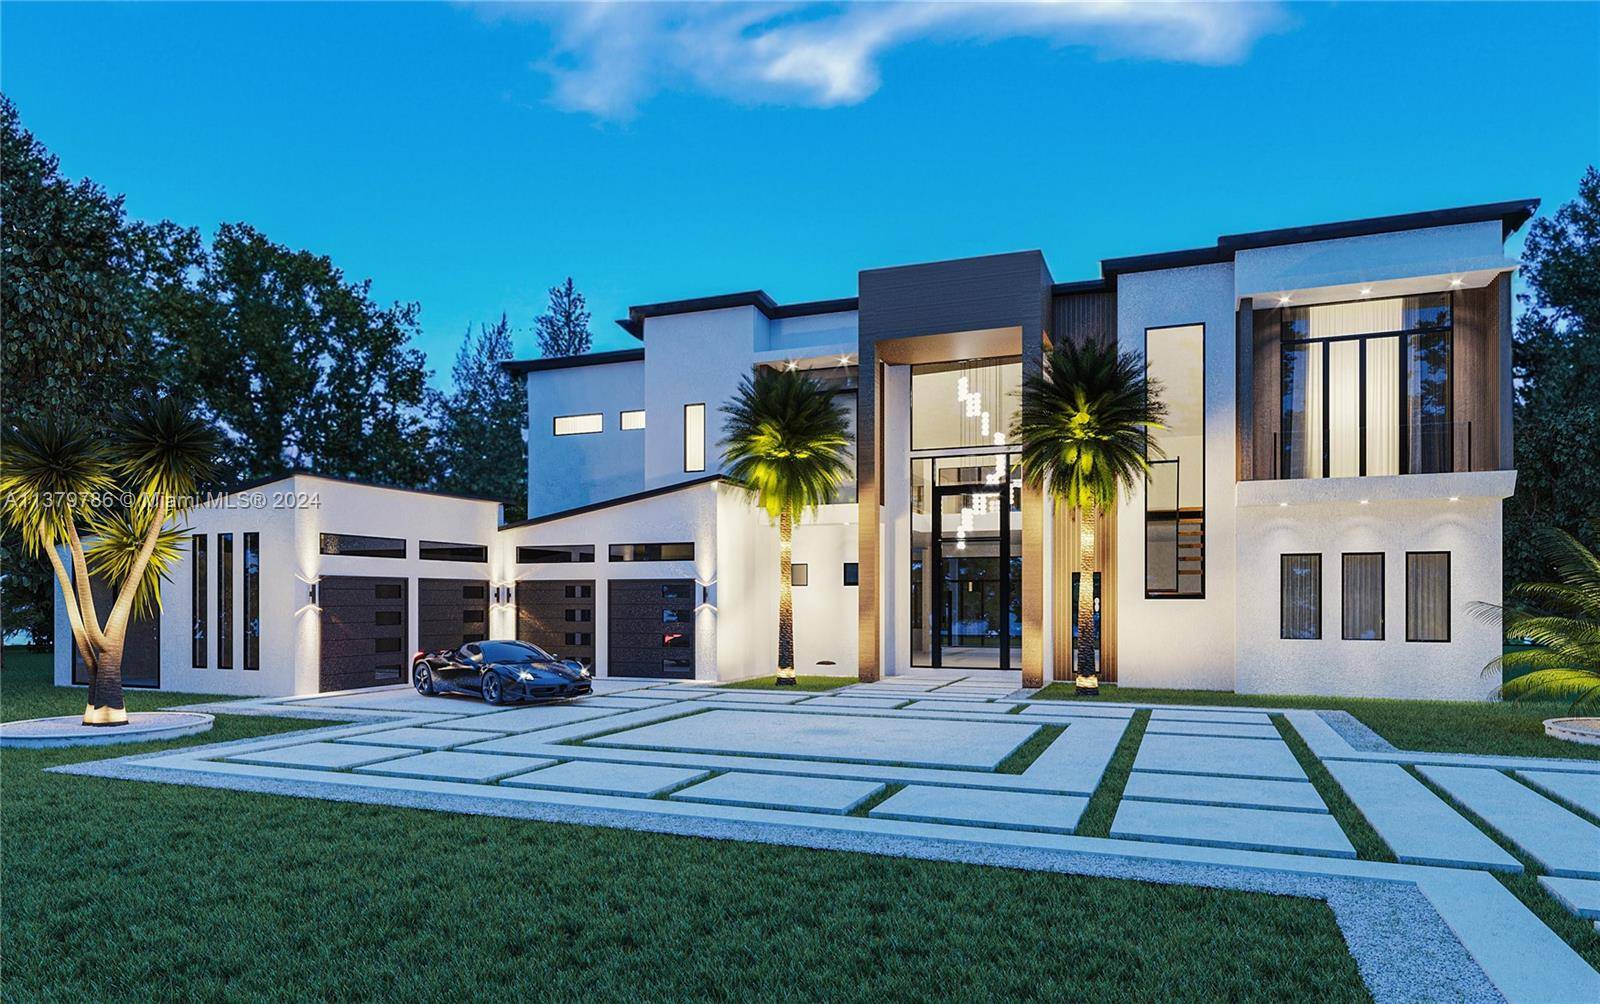 Casa Privata is a stunning ultra luxury home situated in prestigious Parkland, FL.